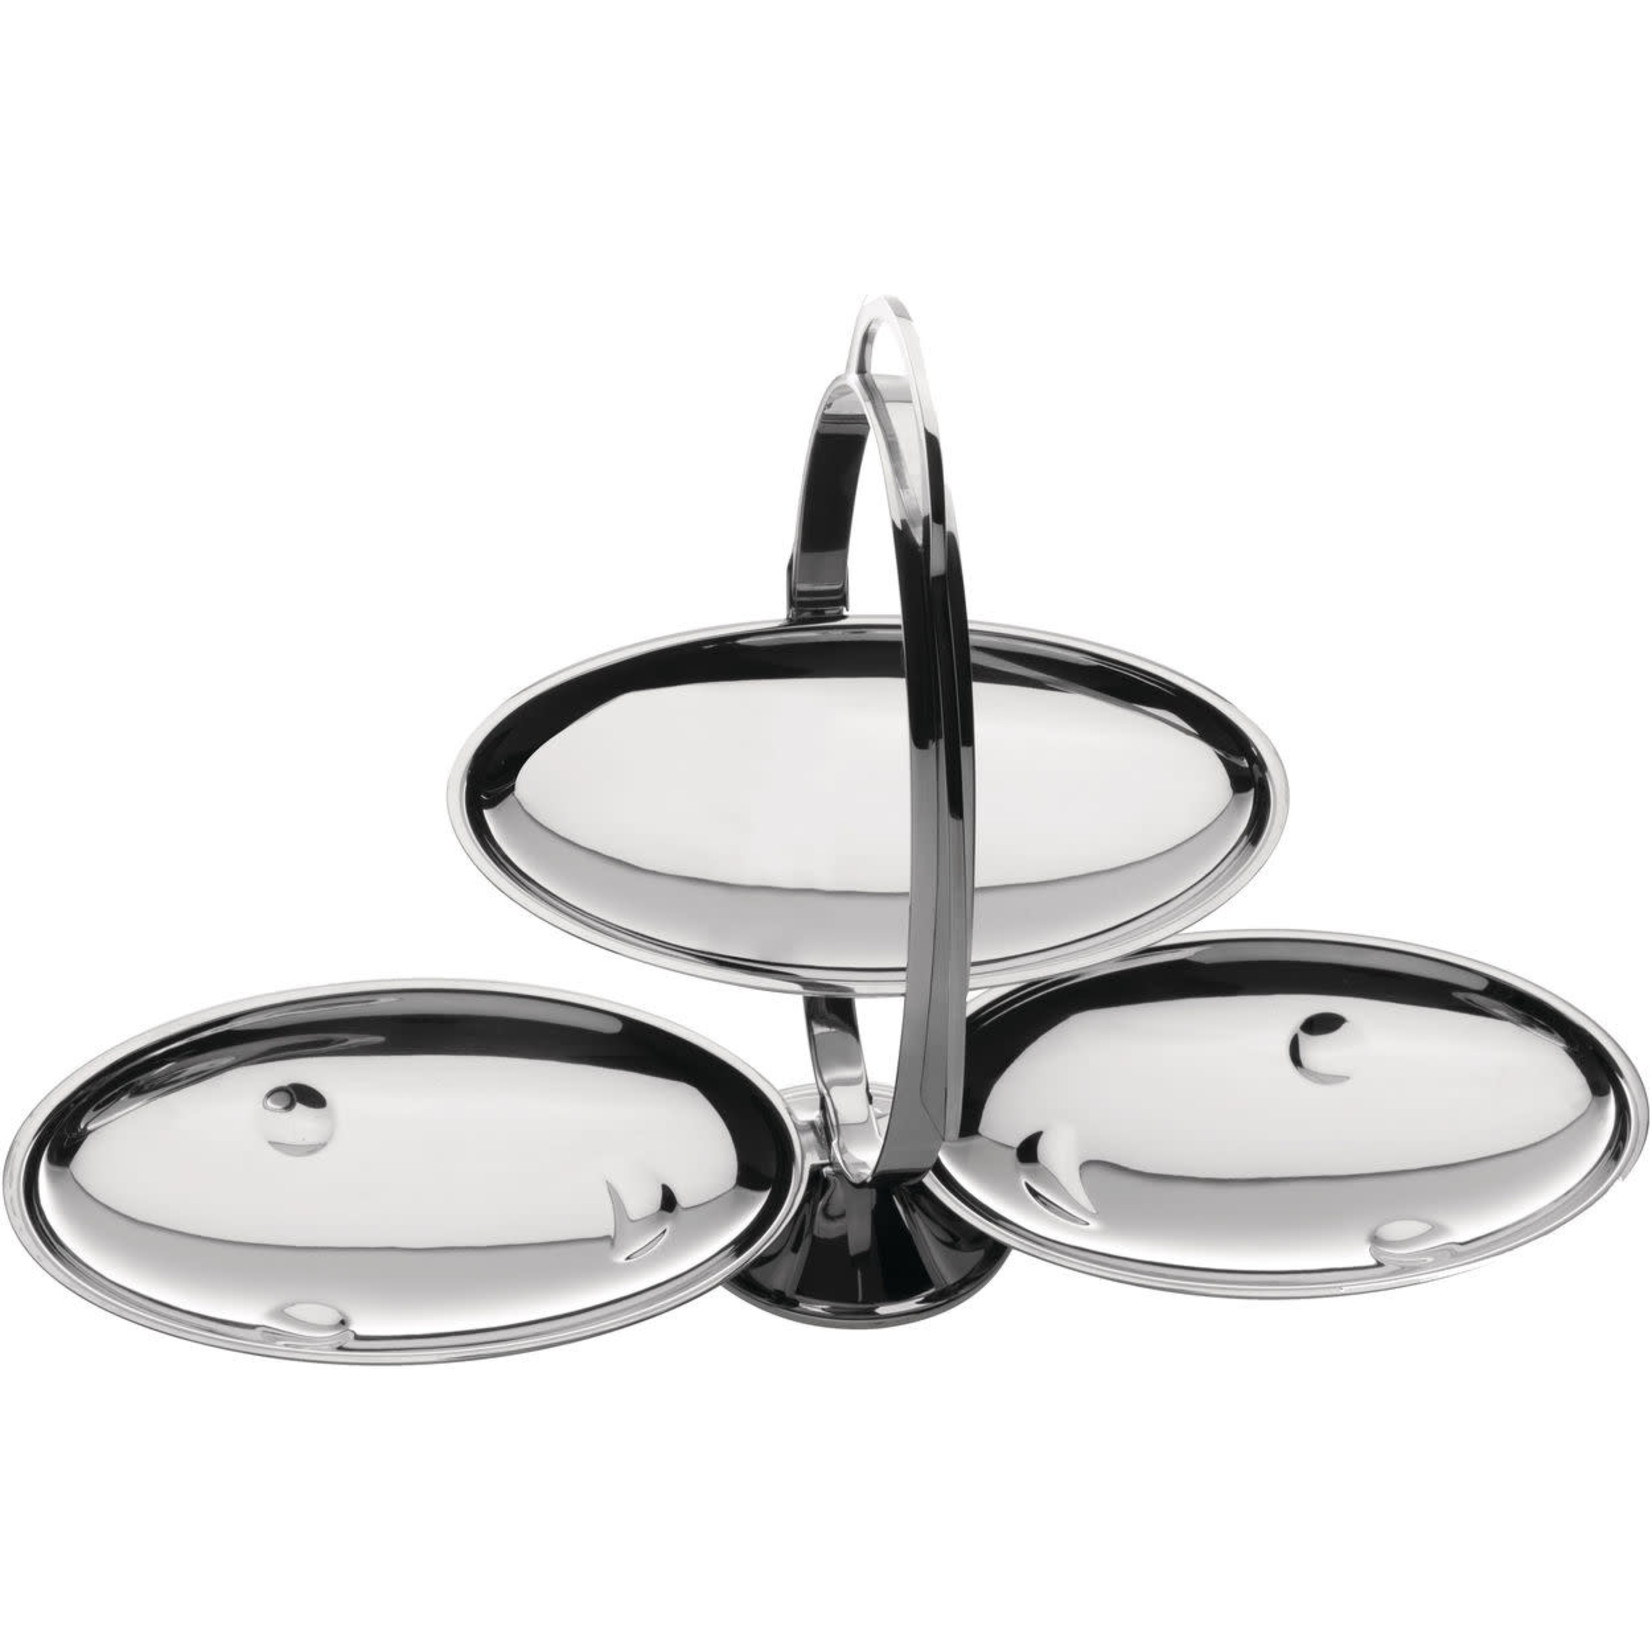 ALESSI Anna Gong Folding Cake Stand DNR